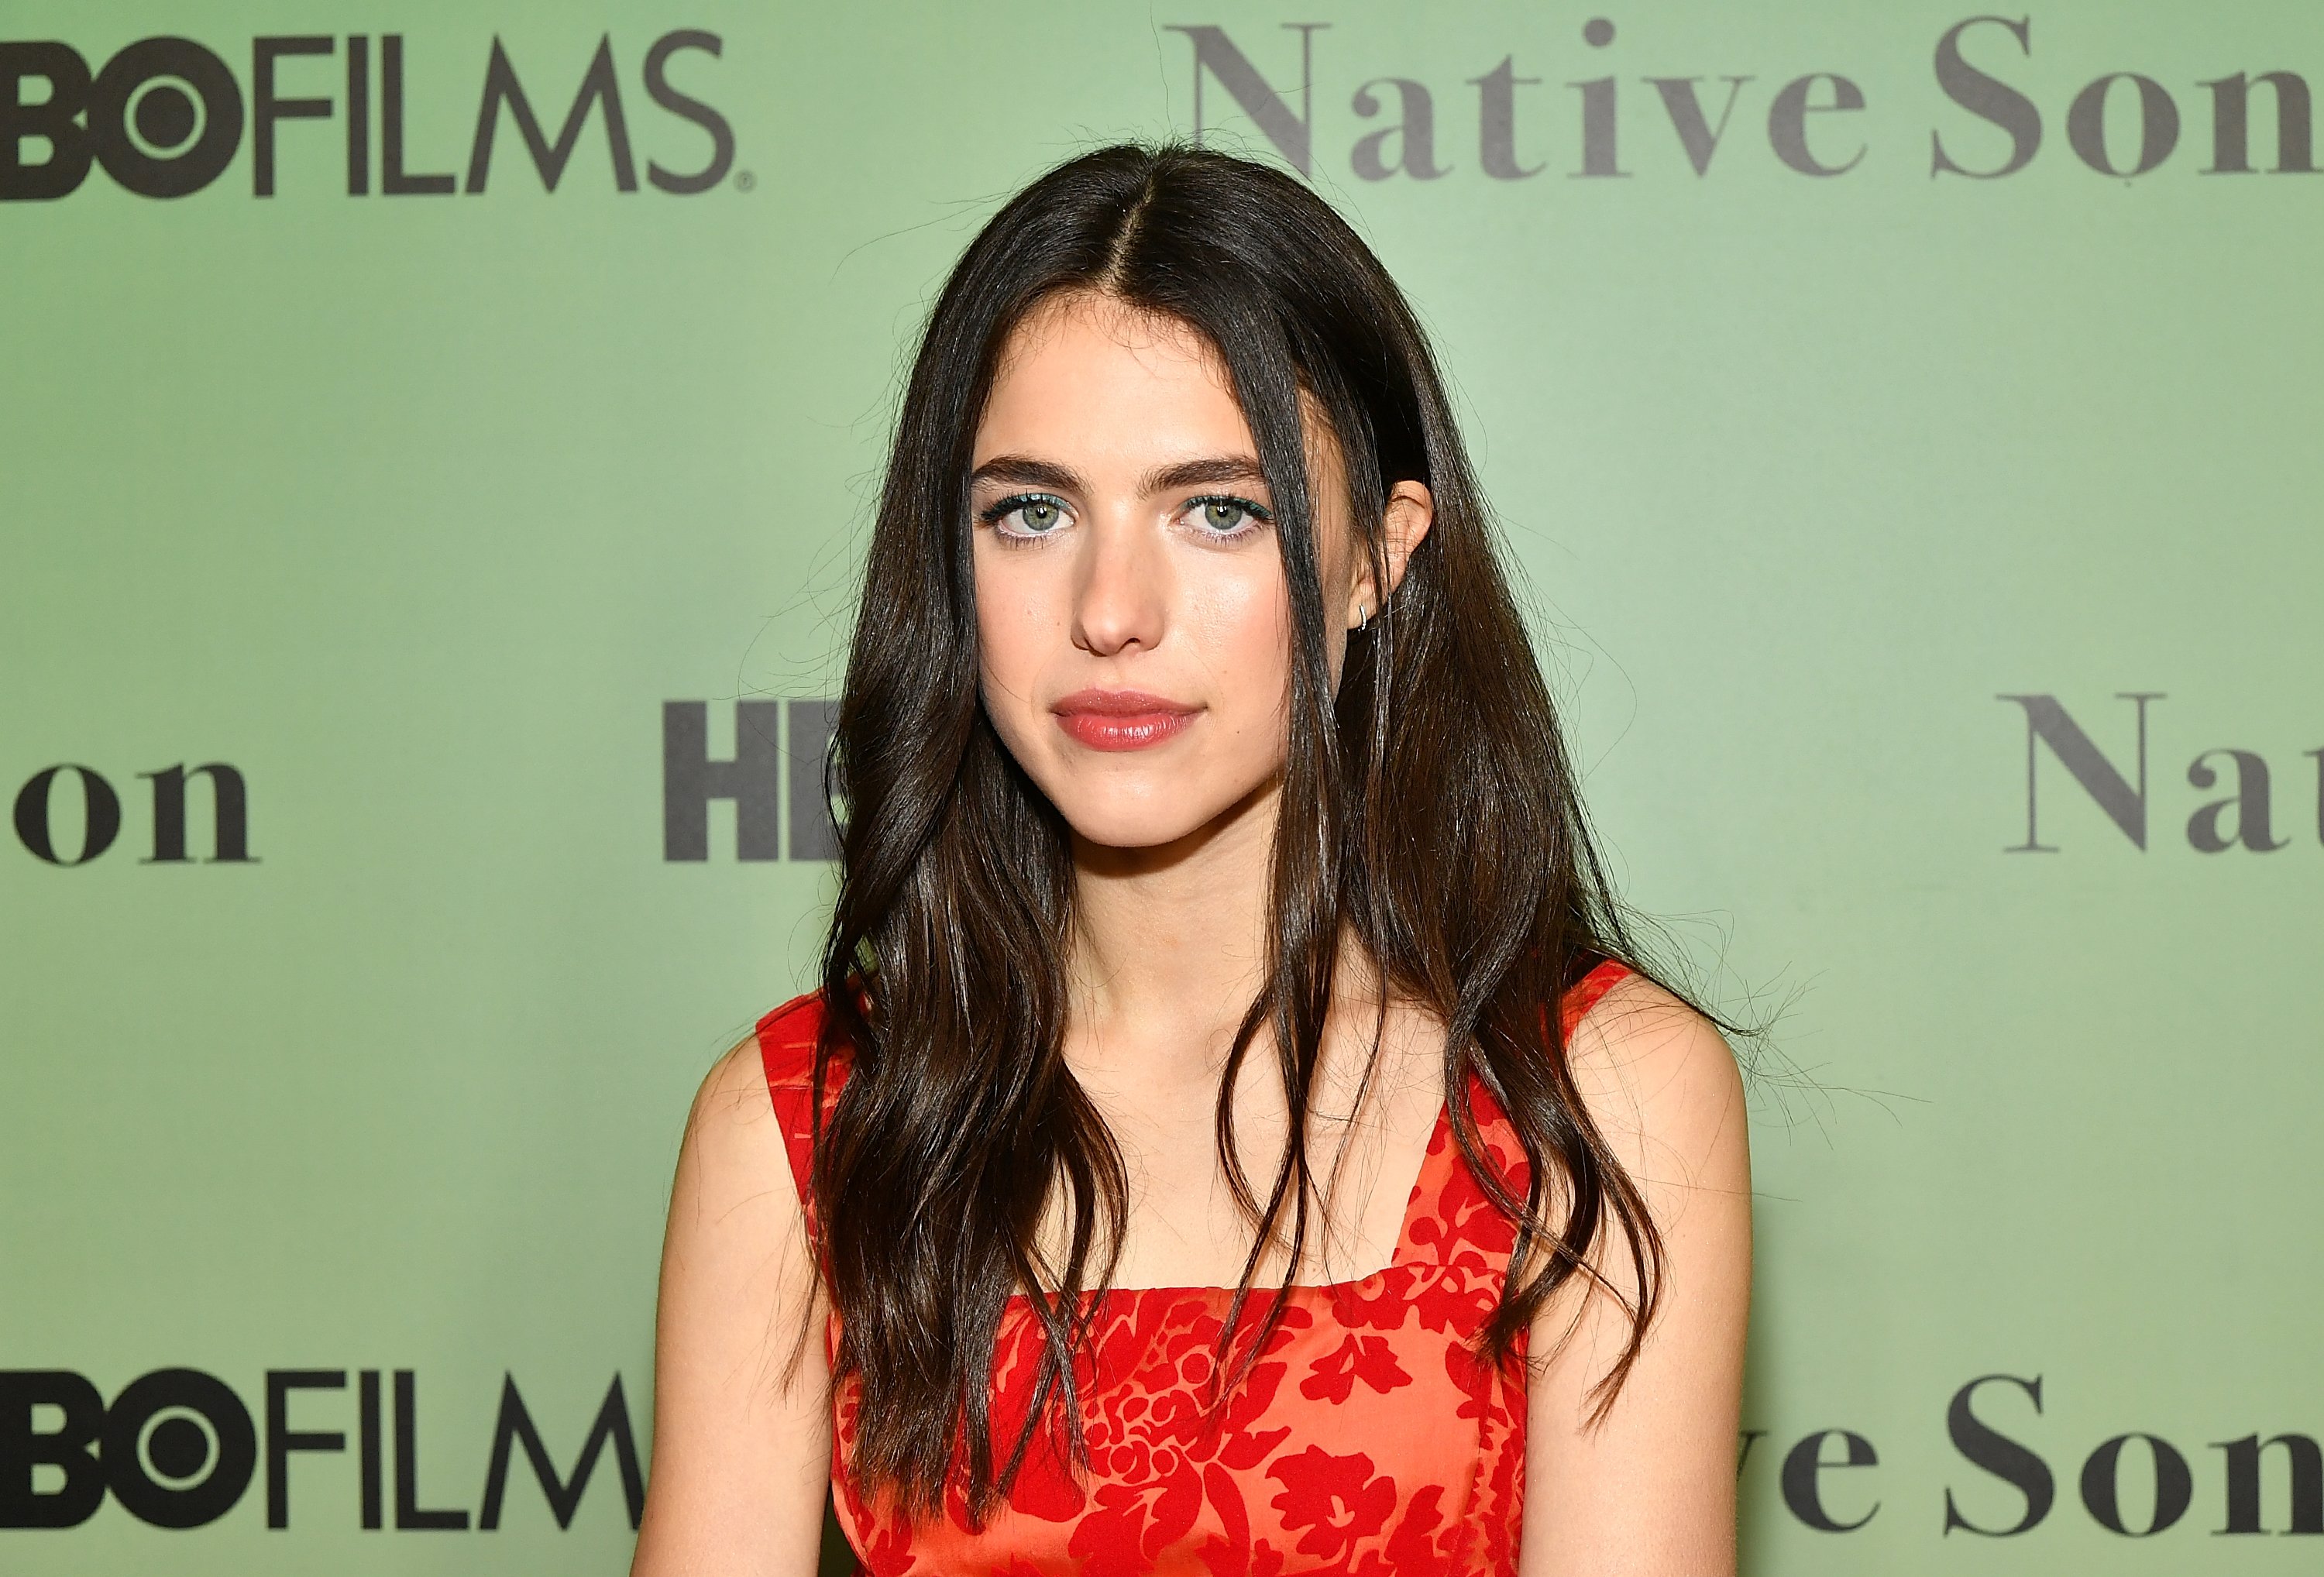 Margaret Qualley attends the screening of "Native Son" at Guggenheim Museum on April 1, 2019 in New York City ┃Source: Getty Images